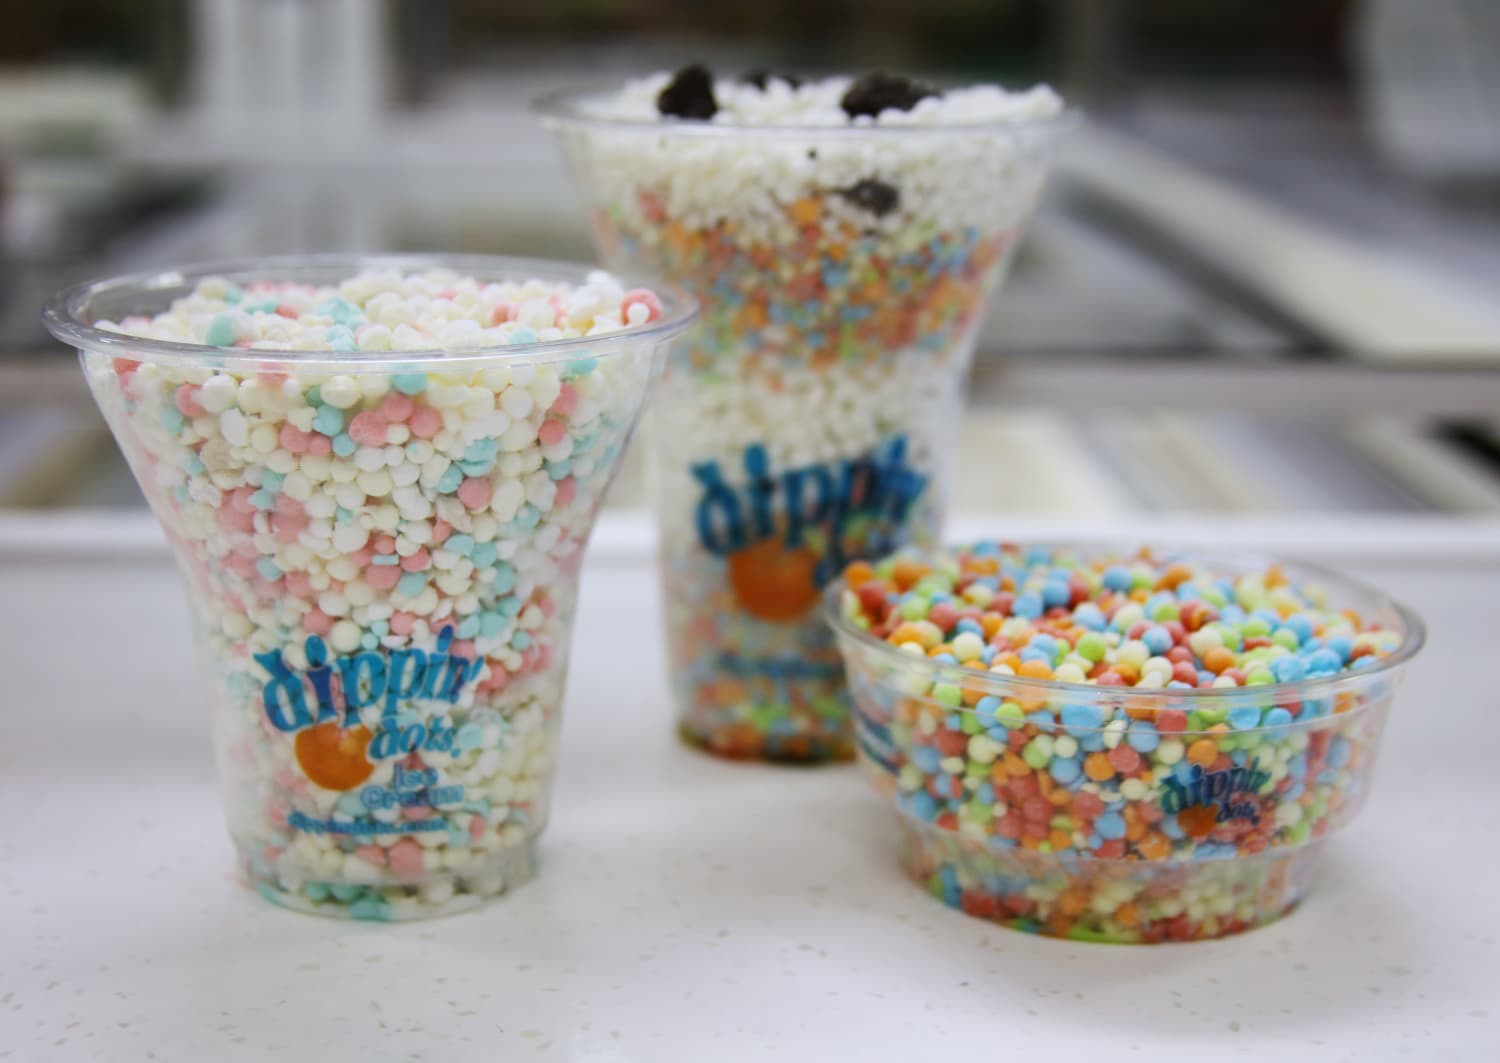 https://media-cldnry.s-nbcnews.com/image/upload/newscms/2017_04/1877081/170124-dippin-dots-cups-1036a.jpg